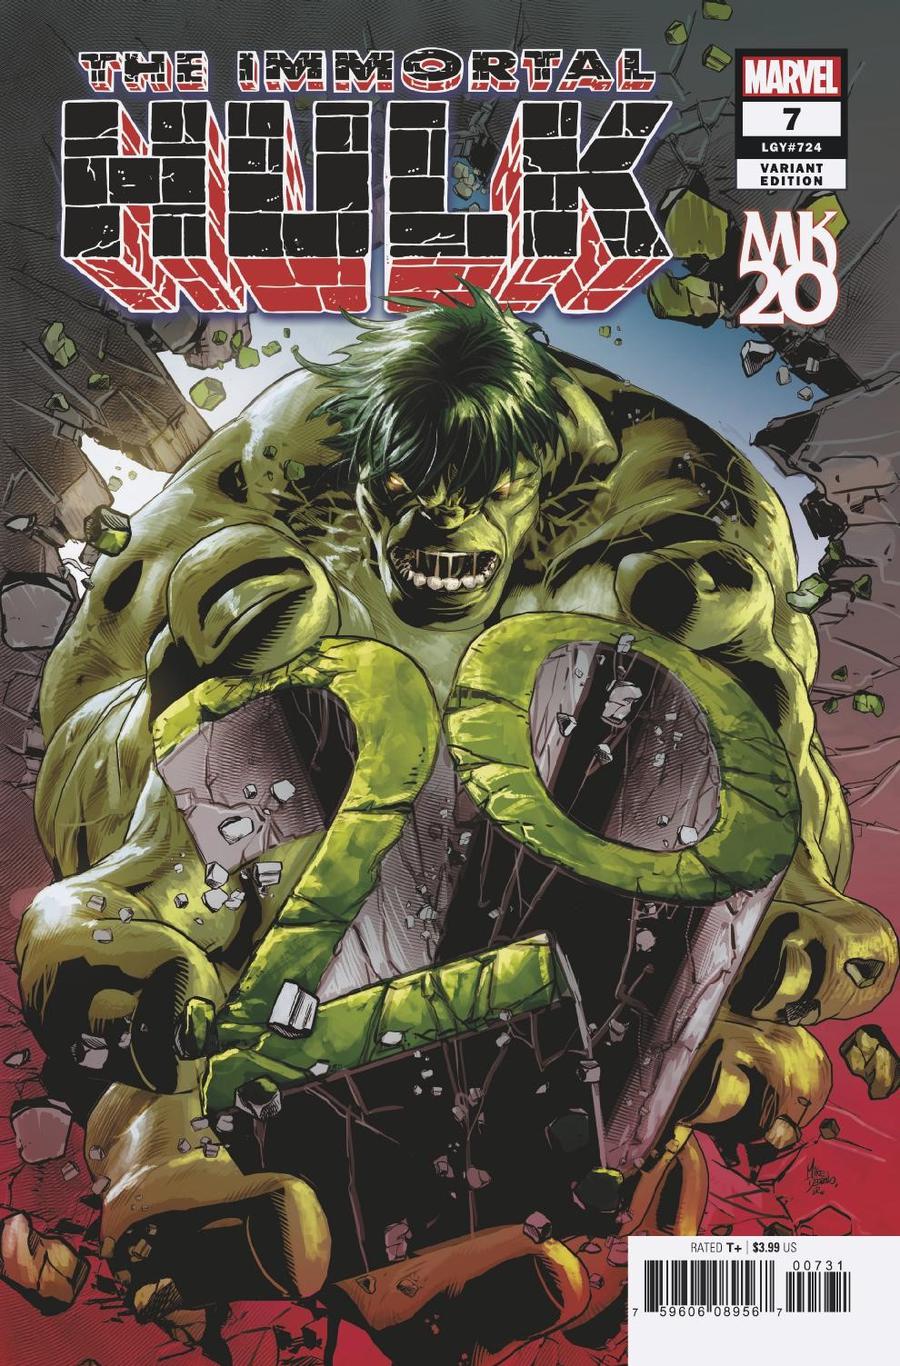 Immortal Hulk #7 Cover C Variant Mike Deodato Jr MKXX Cover